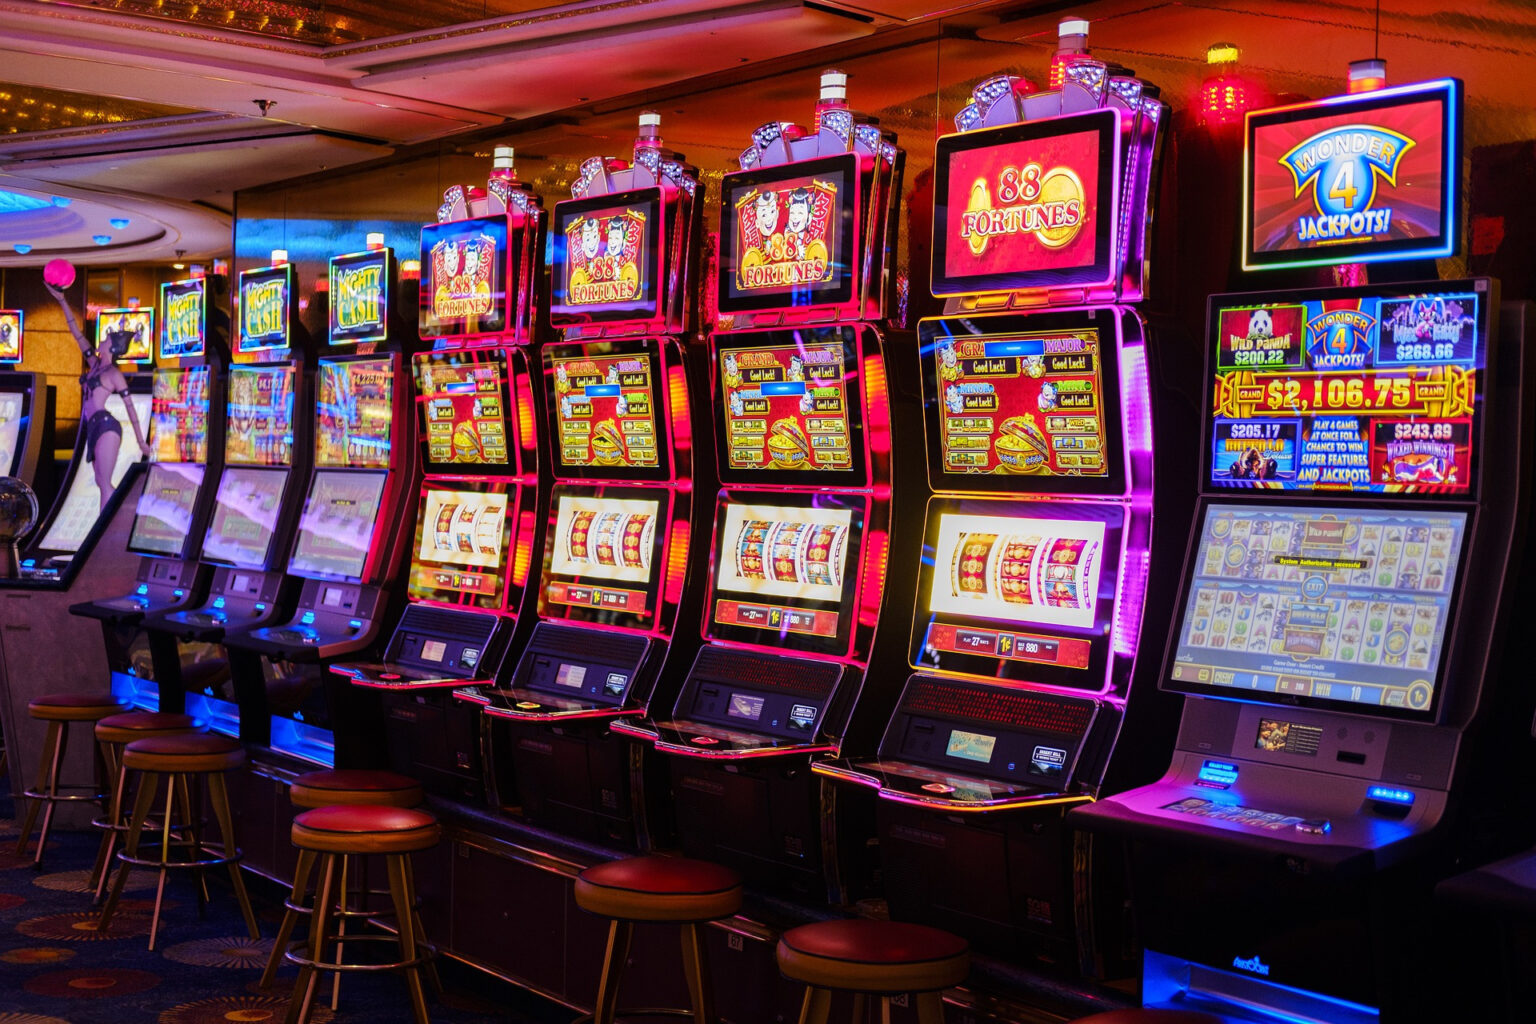 Looking for a slot machine but don't have a lot of money to play? Check out these online slot machines that are perfect if you're tight on funds.